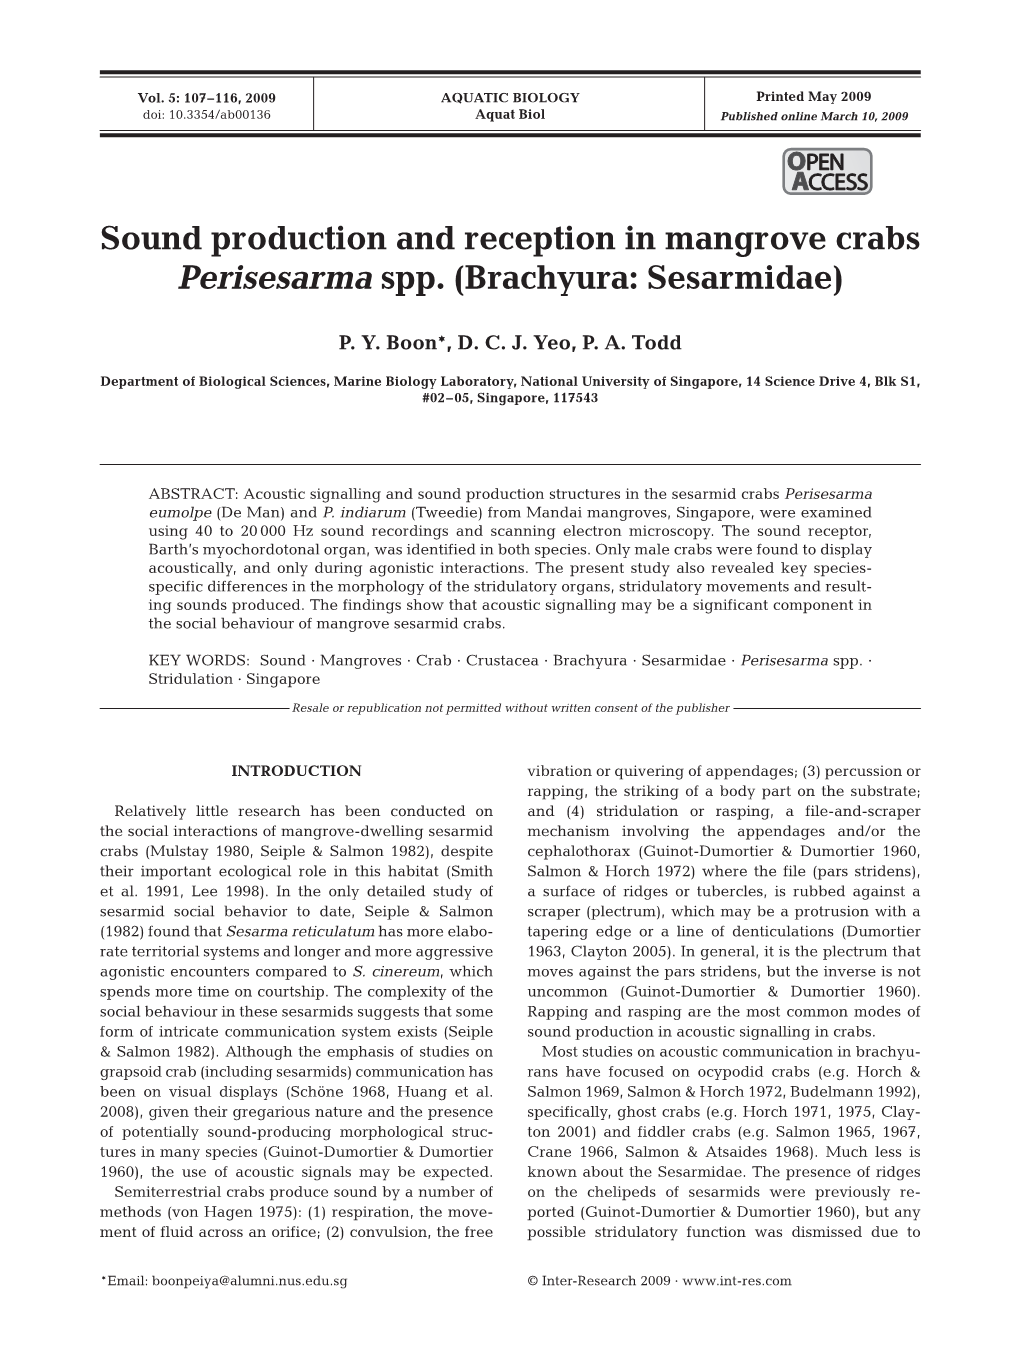 Sound Production and Reception in Mangrove Crabs Perisesarma Spp